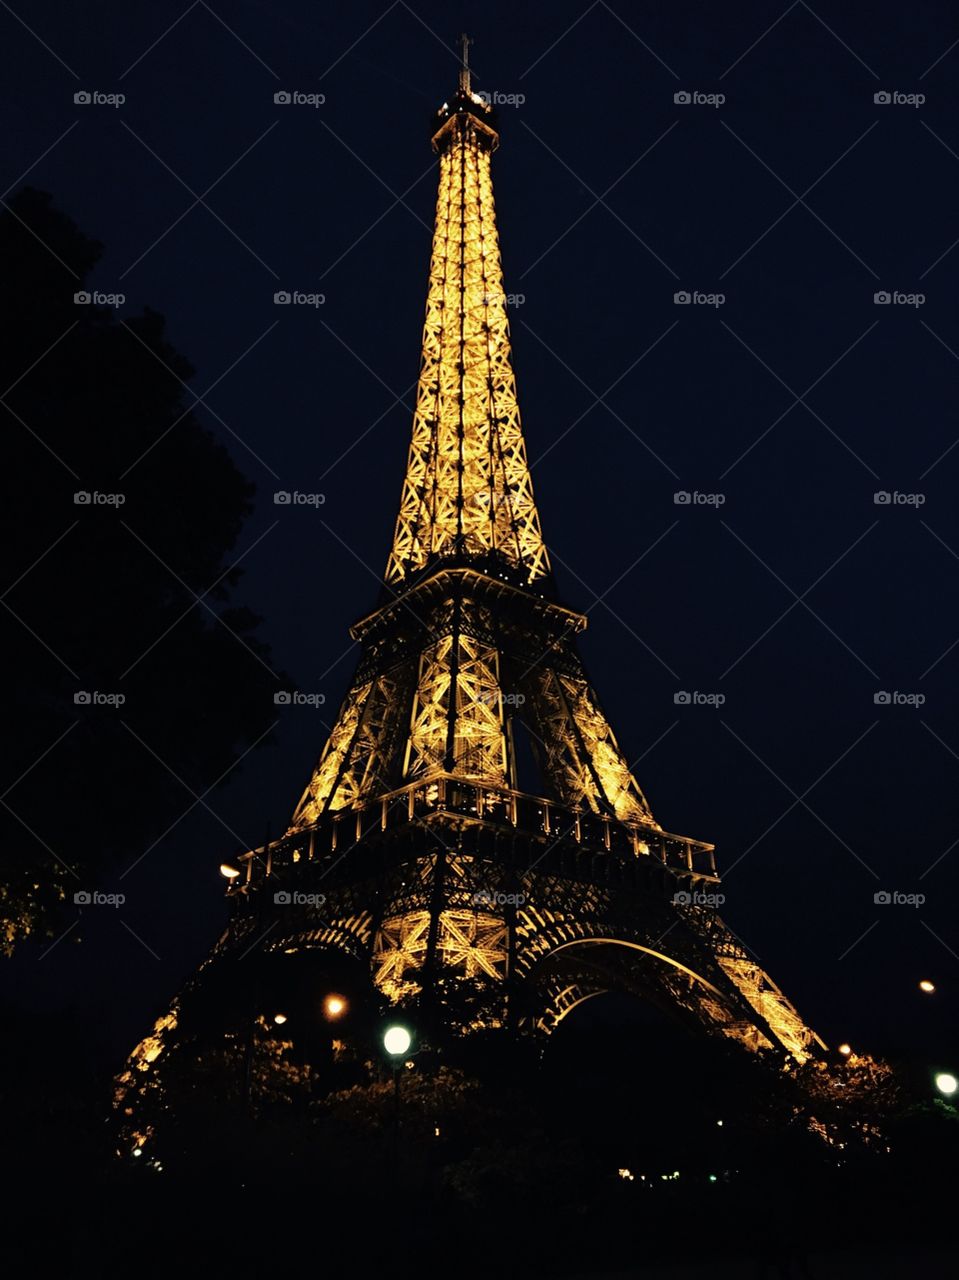 Eiffel Tower at night with tree silhouette against the dark blue sky. 